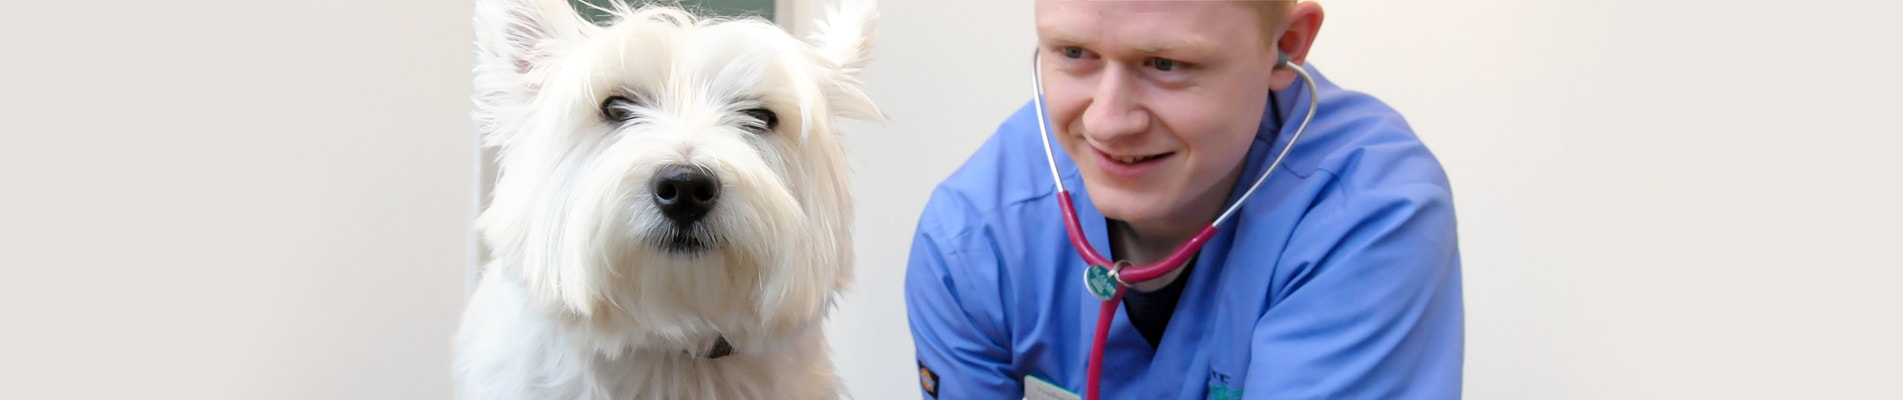 Small animal veterinary services from St Clair Vets in Fife